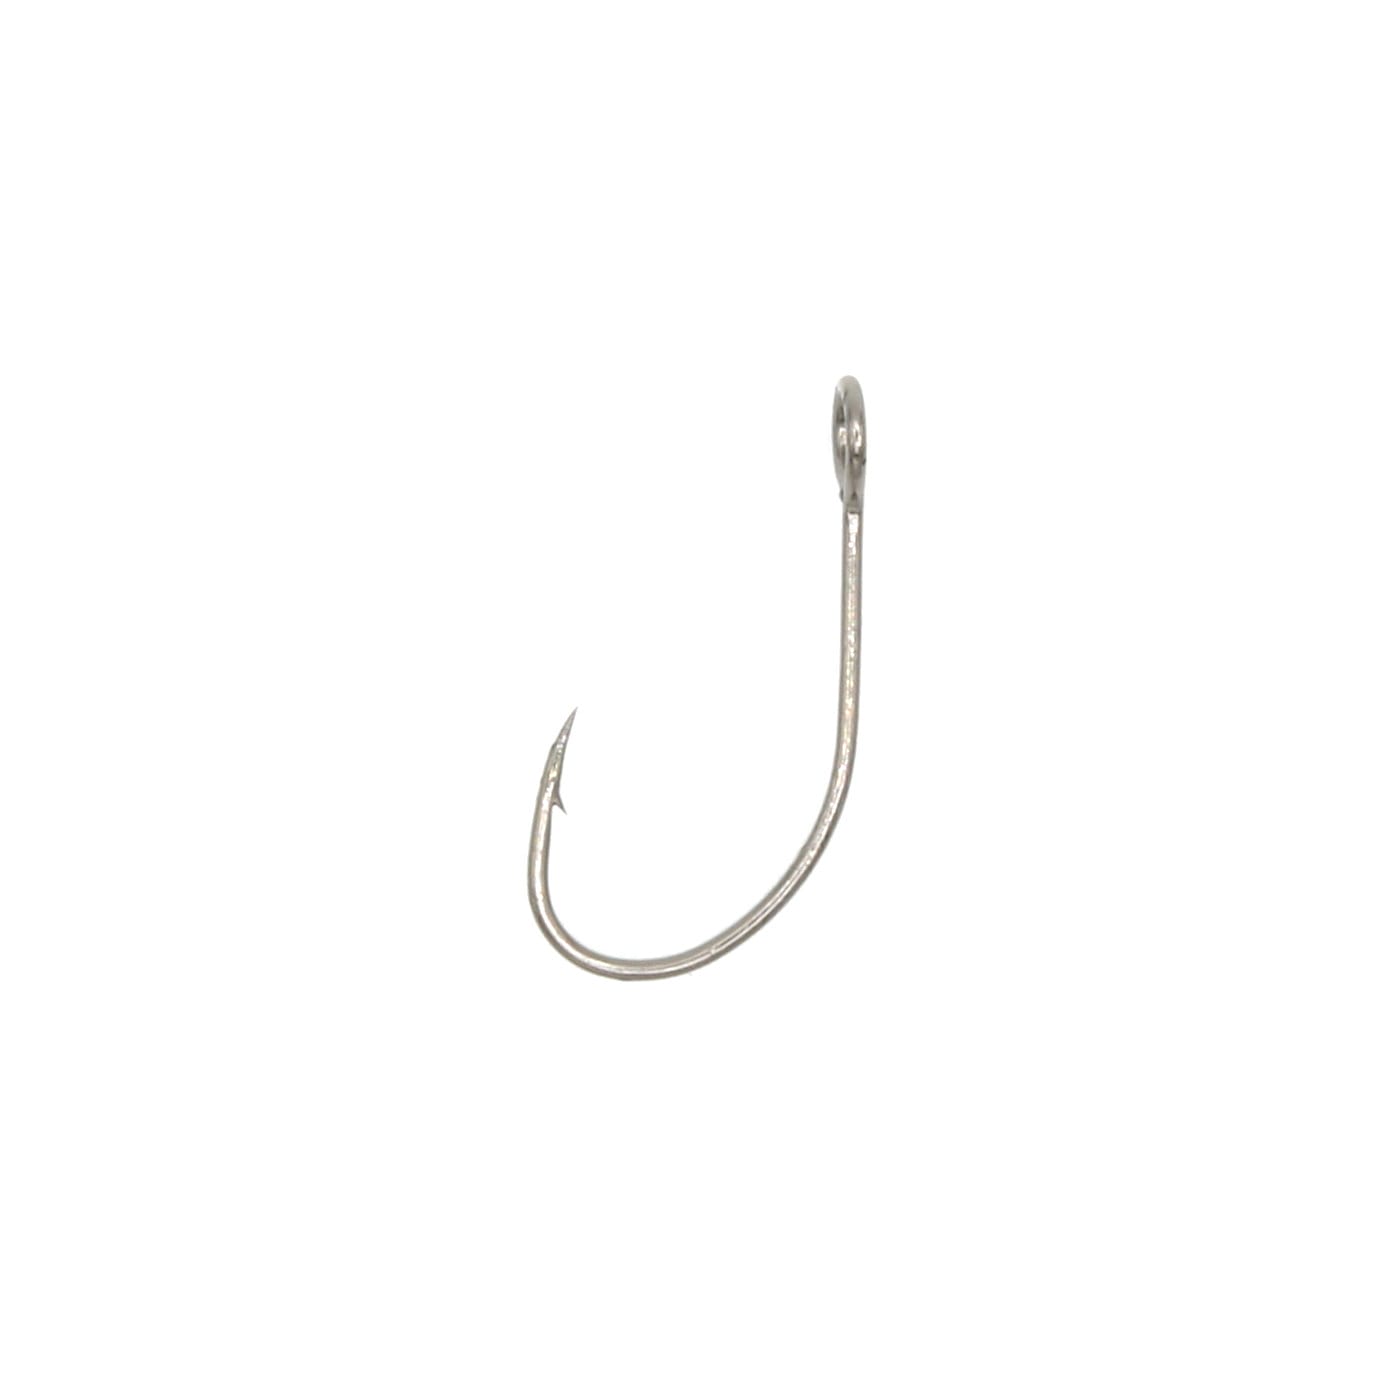 Tsurinoya Single Replacement Micro-Barbed Stream Hook for Spoons